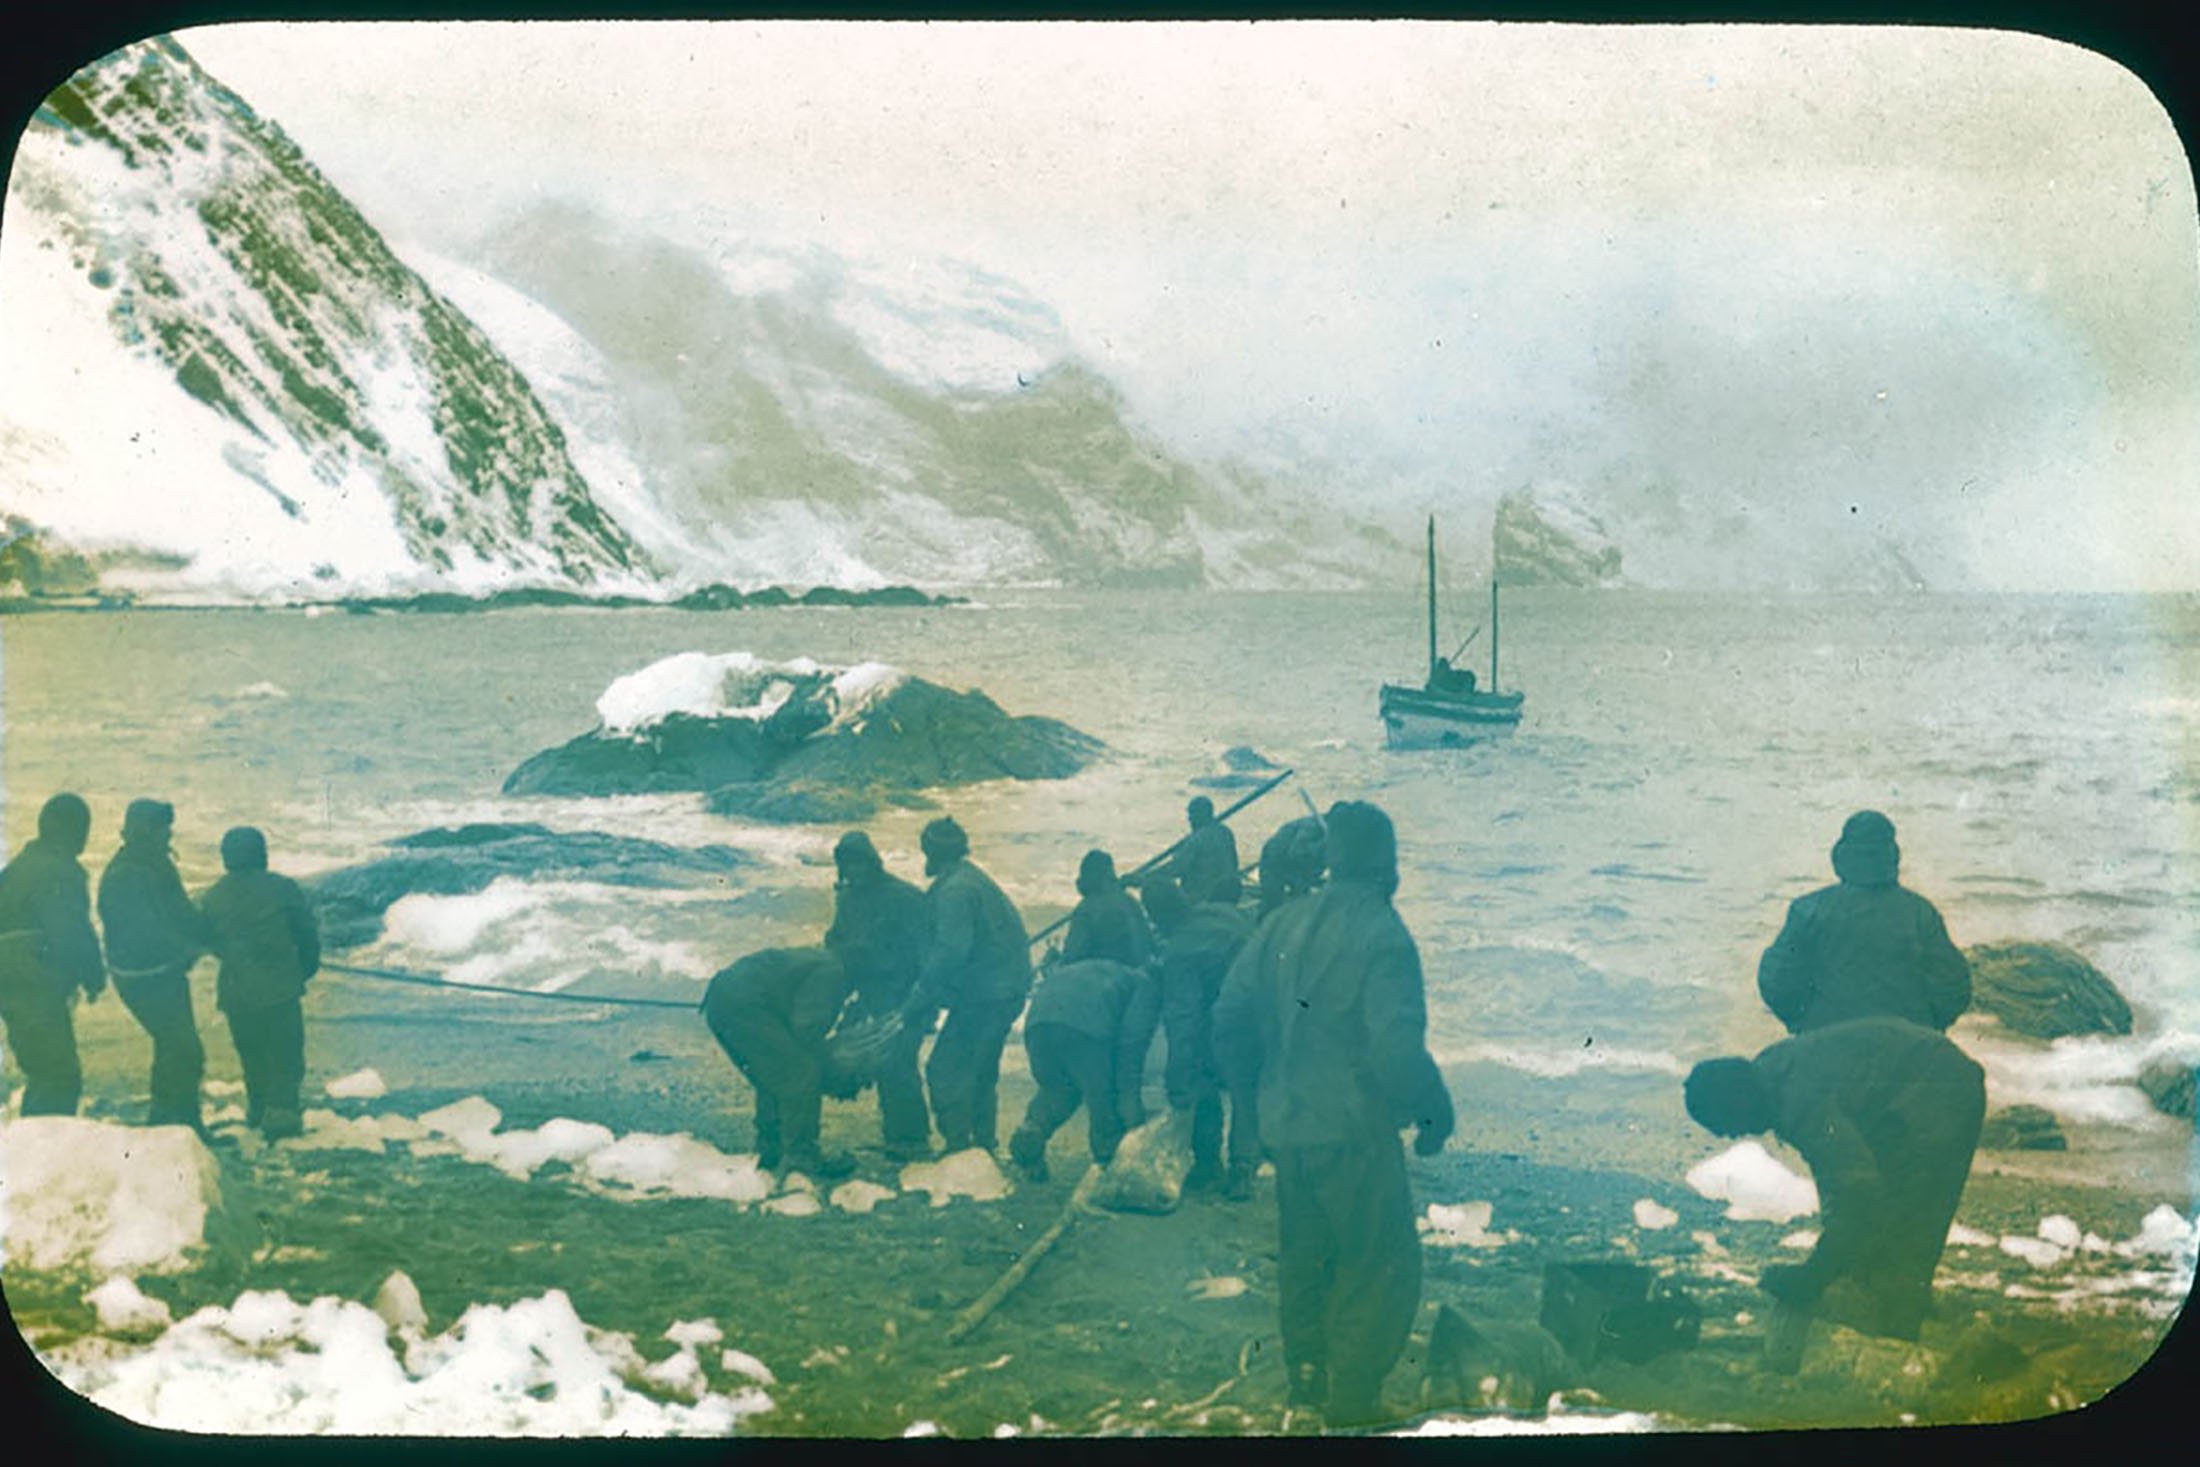 Sir Ernest Shackleton's James Caird sails from Elephant Island to South Georgia to get relief for the marooned party of 